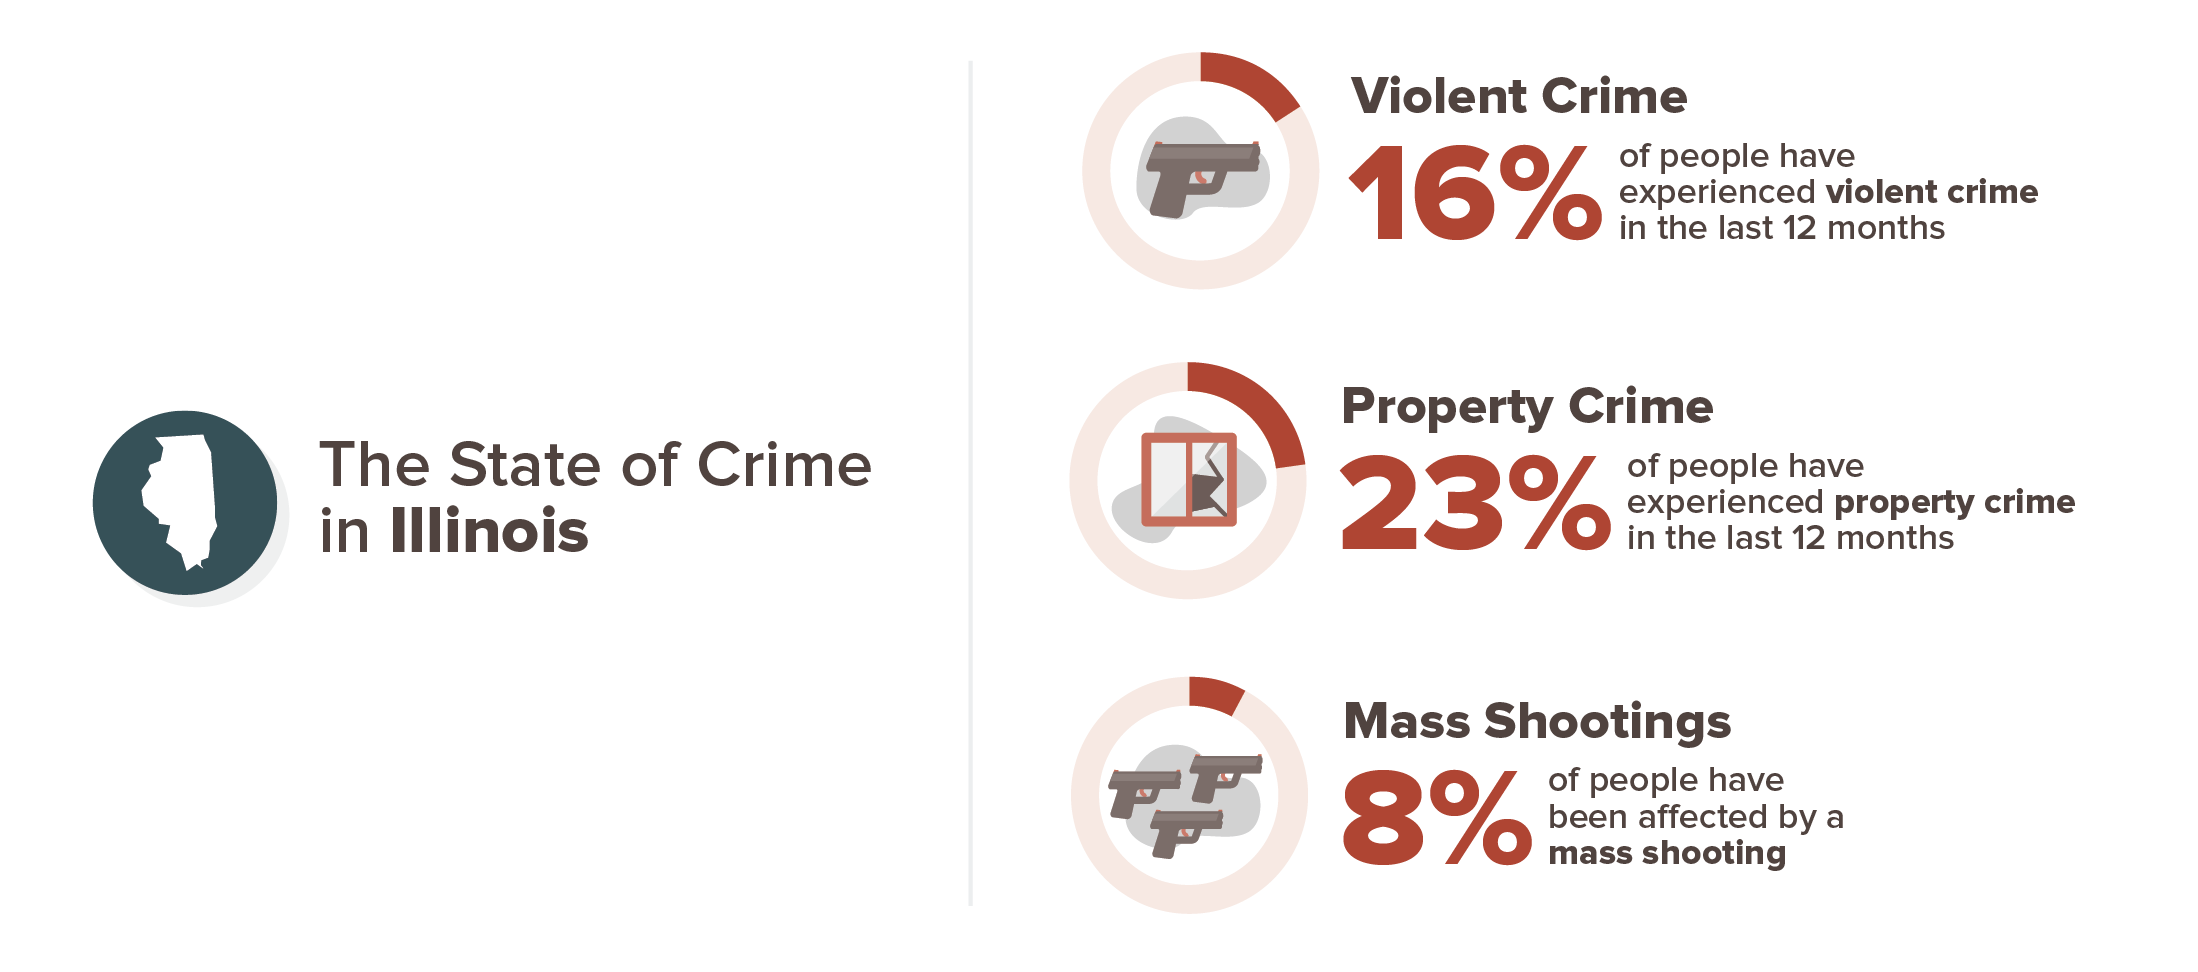 Illinois crime experience infographic; 16% violent crime, 23% property crime, 8% mass shooting